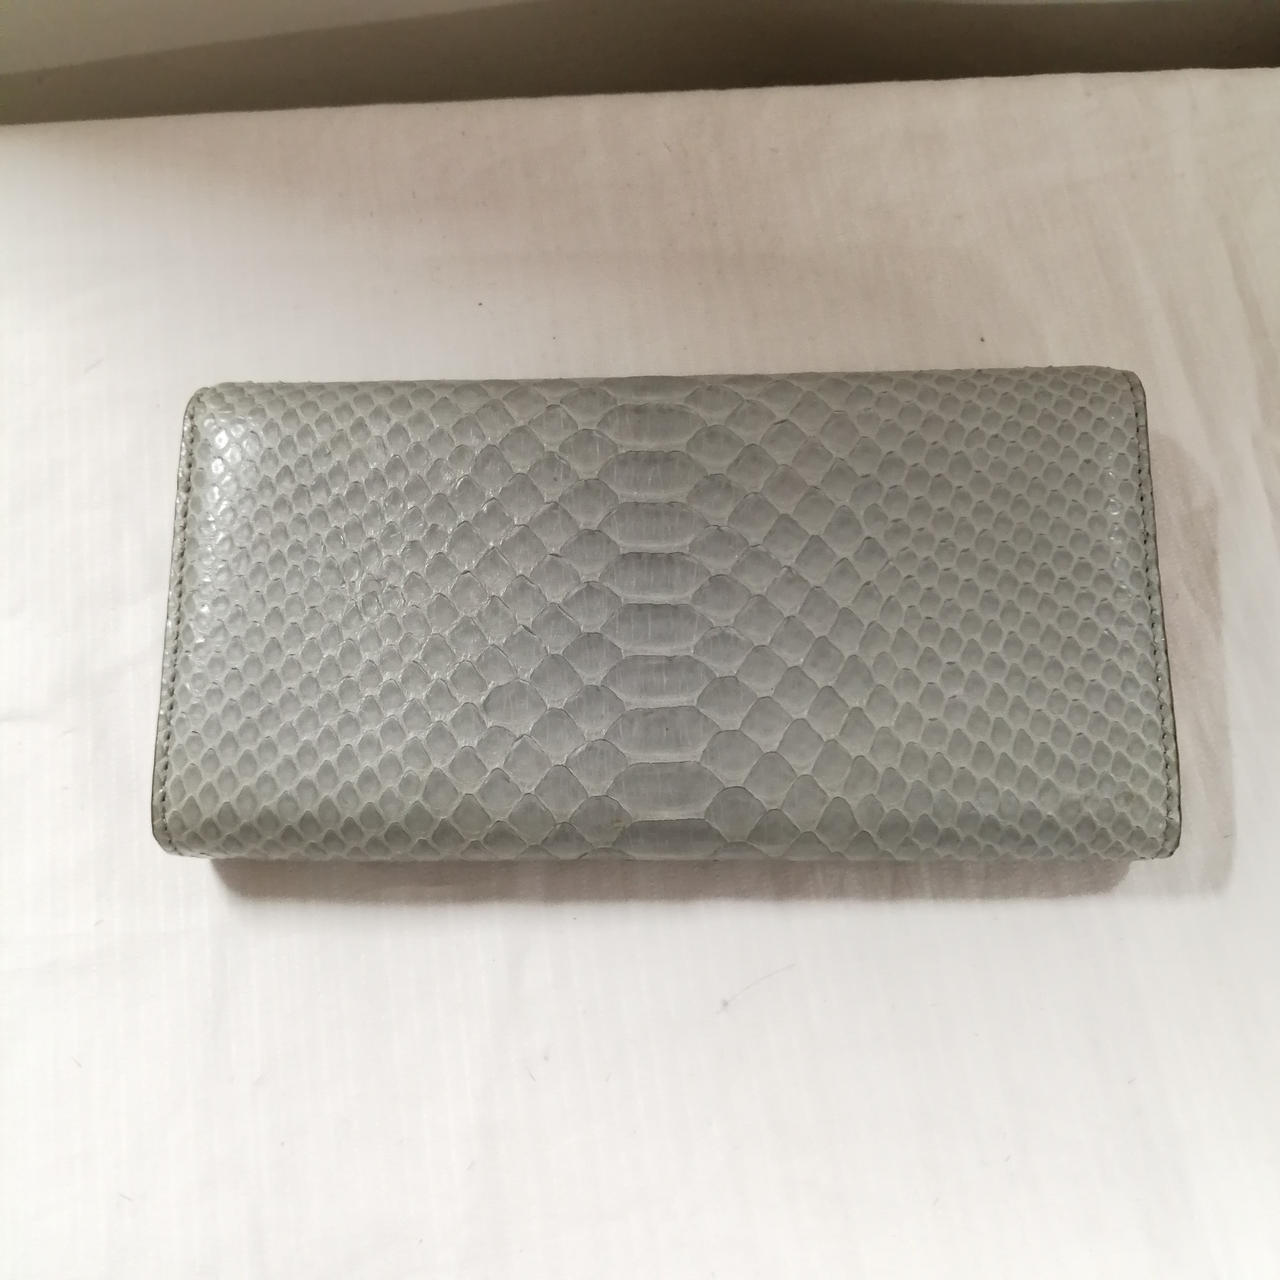 Bally L.Gry/Snake/Dirty Flap Long Wallet - image 2